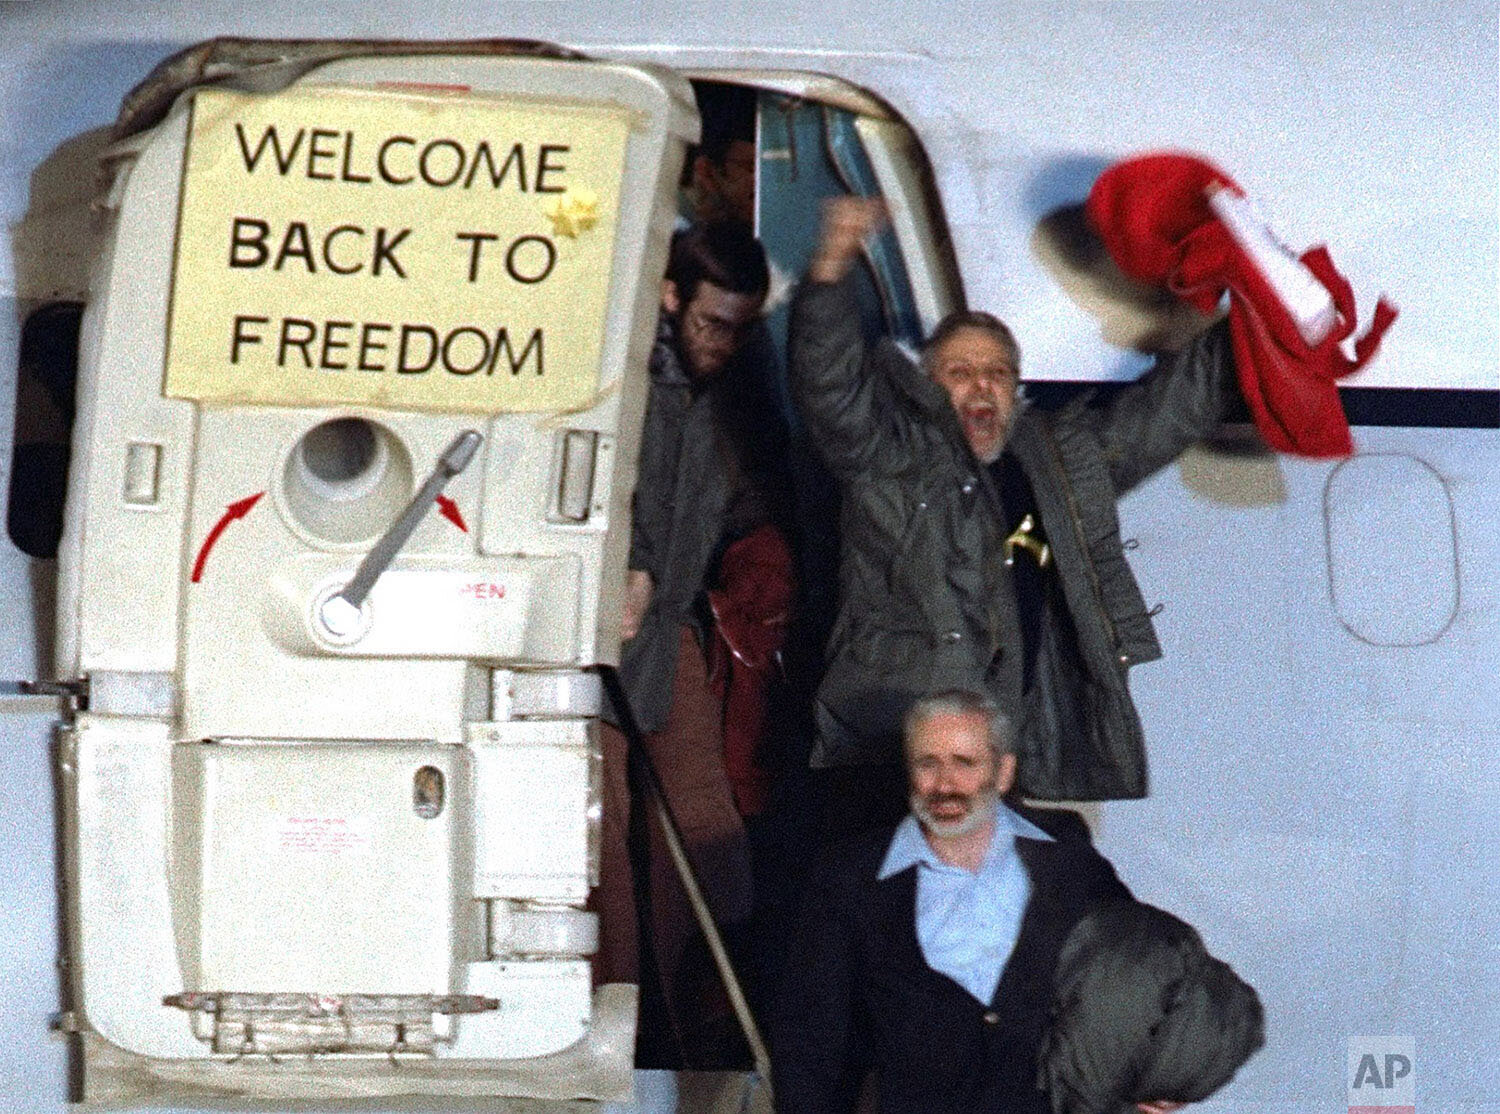  David Roeder shouts and waves as he arrives at Rhein-Main U.S. Air Force base in Frankfurt, West Germany from Algeria on January 21, 1981.  He was among 52 Americans held hostage in Iran for 444 days after their capture at the U.S. Embassy in Tehran